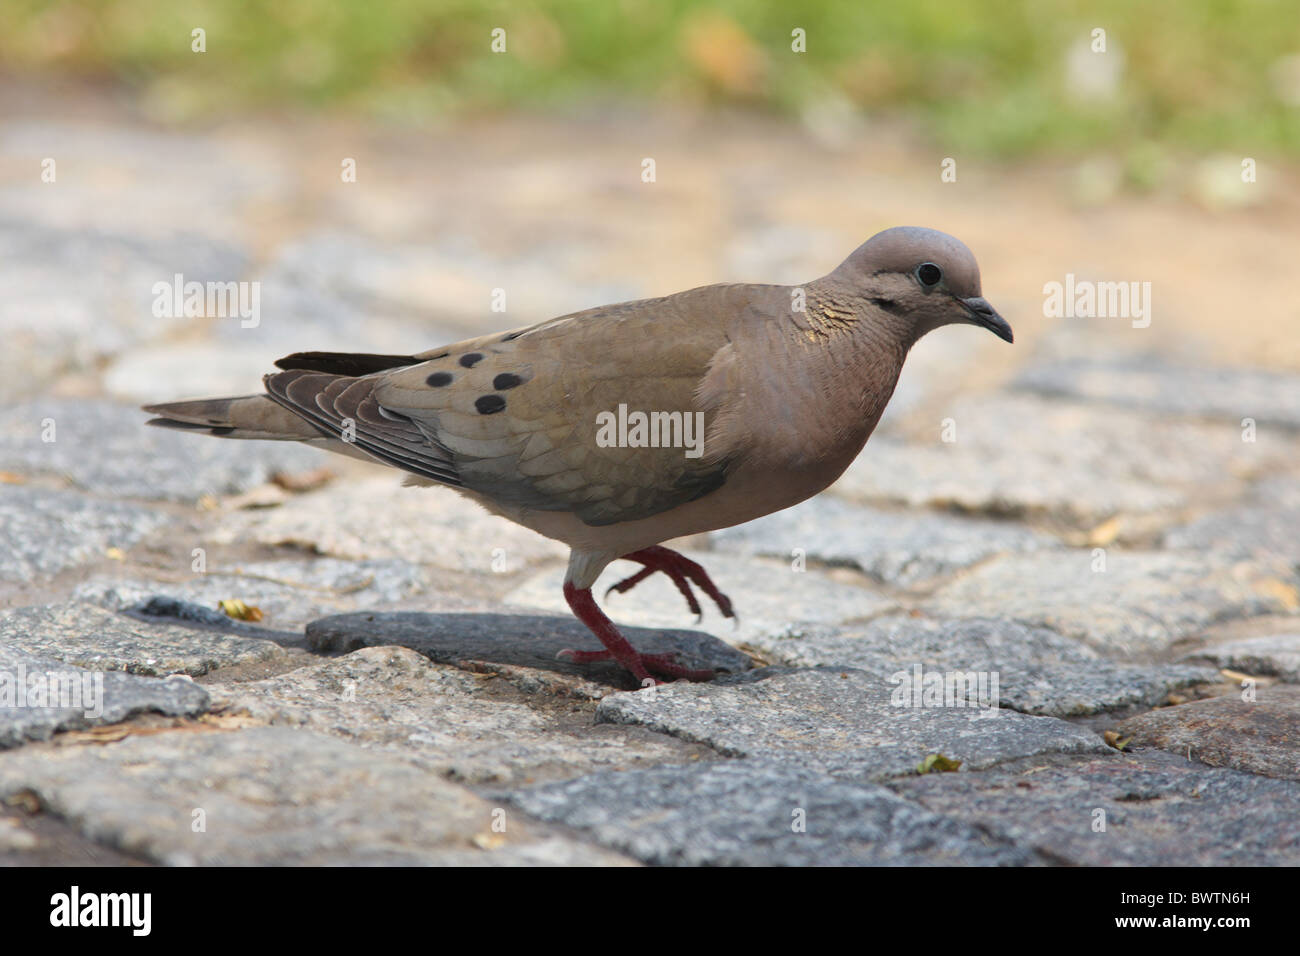 Eared Dove (Zenaida auriculata) adult, walking on cobbled road, Buenos Aires, Argentina, january Stock Photo